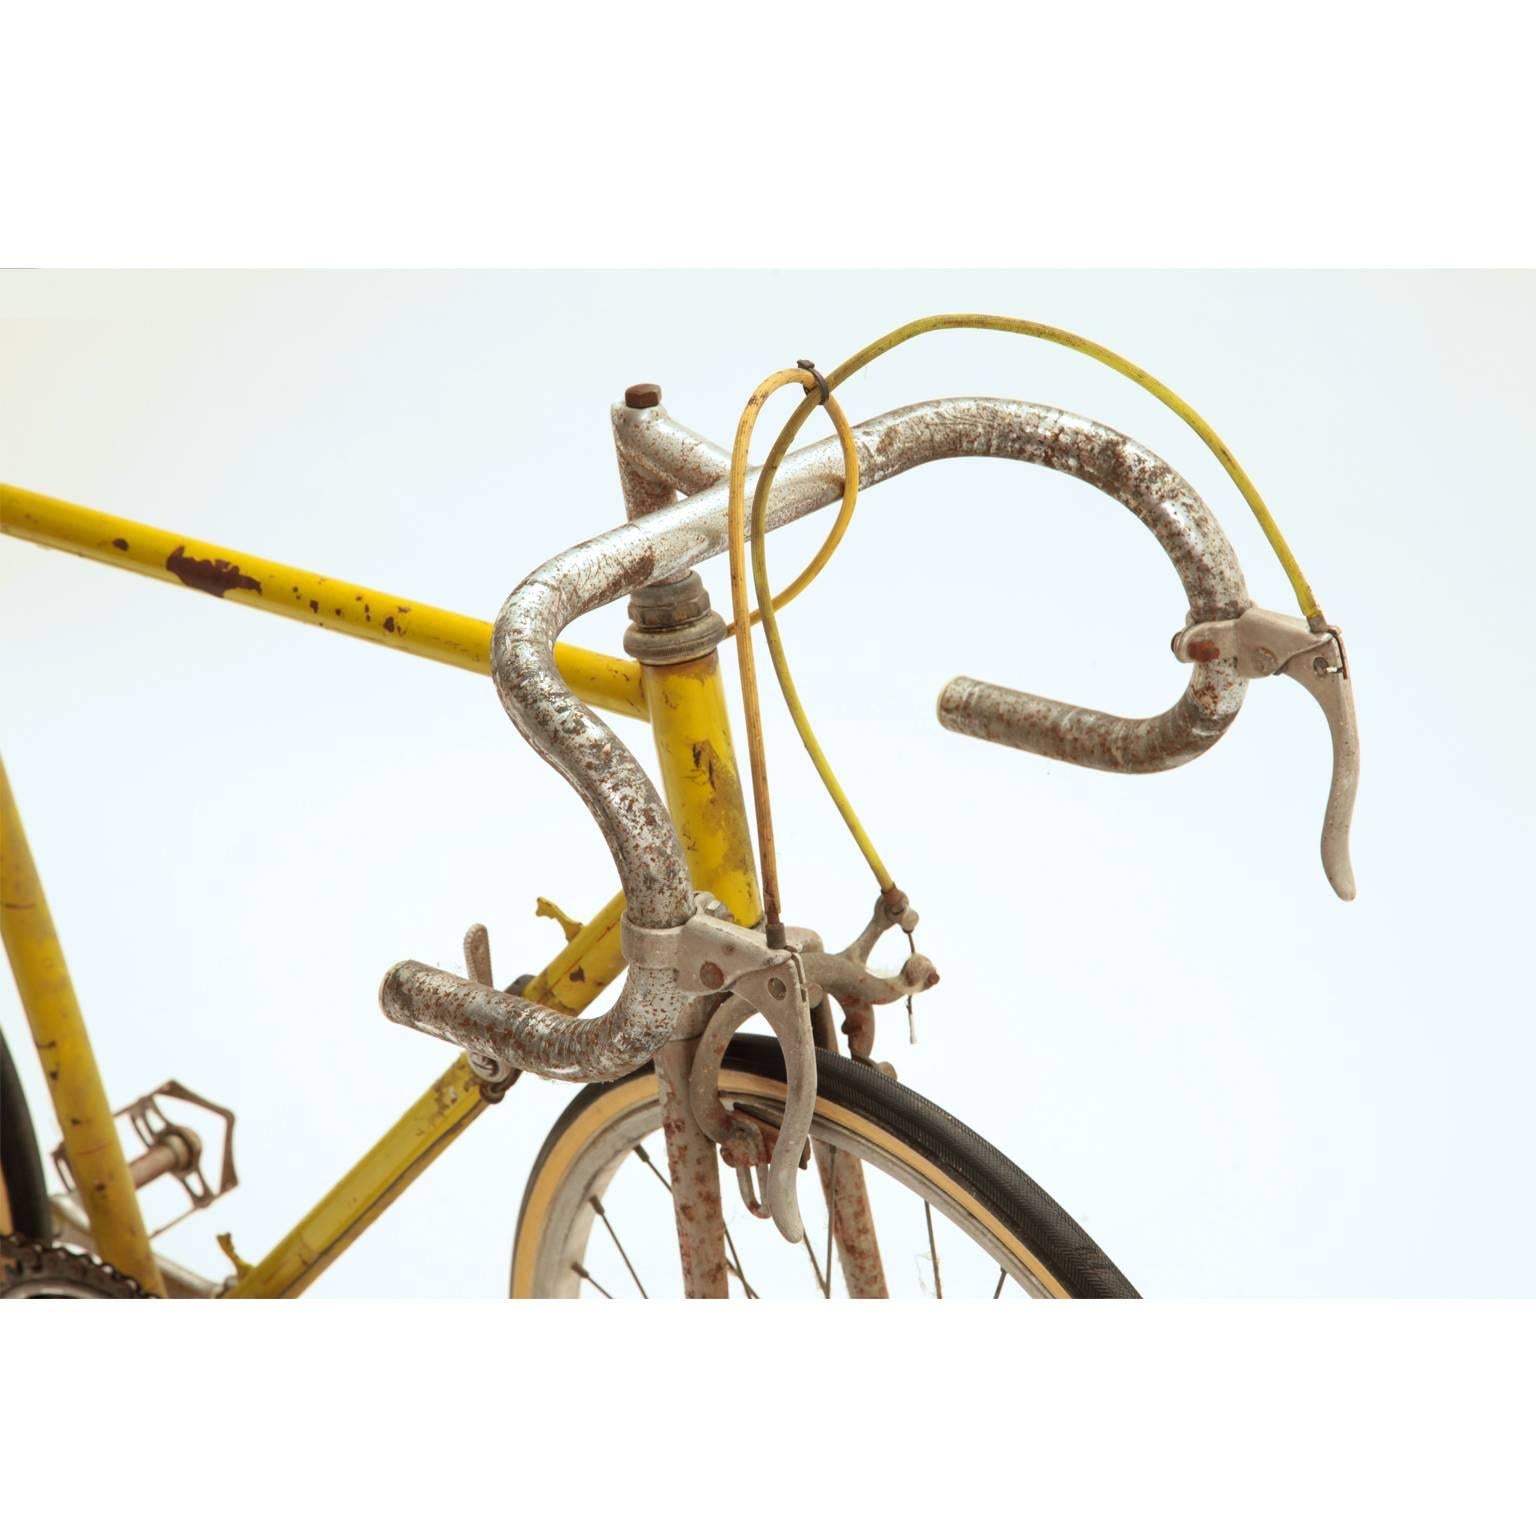 Unusual competition racing bike by Campagnola for children. With 20'' wheels, leather saddle and rims by Ambrosio. It is yellow lacquered and has chrome rims, pedals and handlebar.